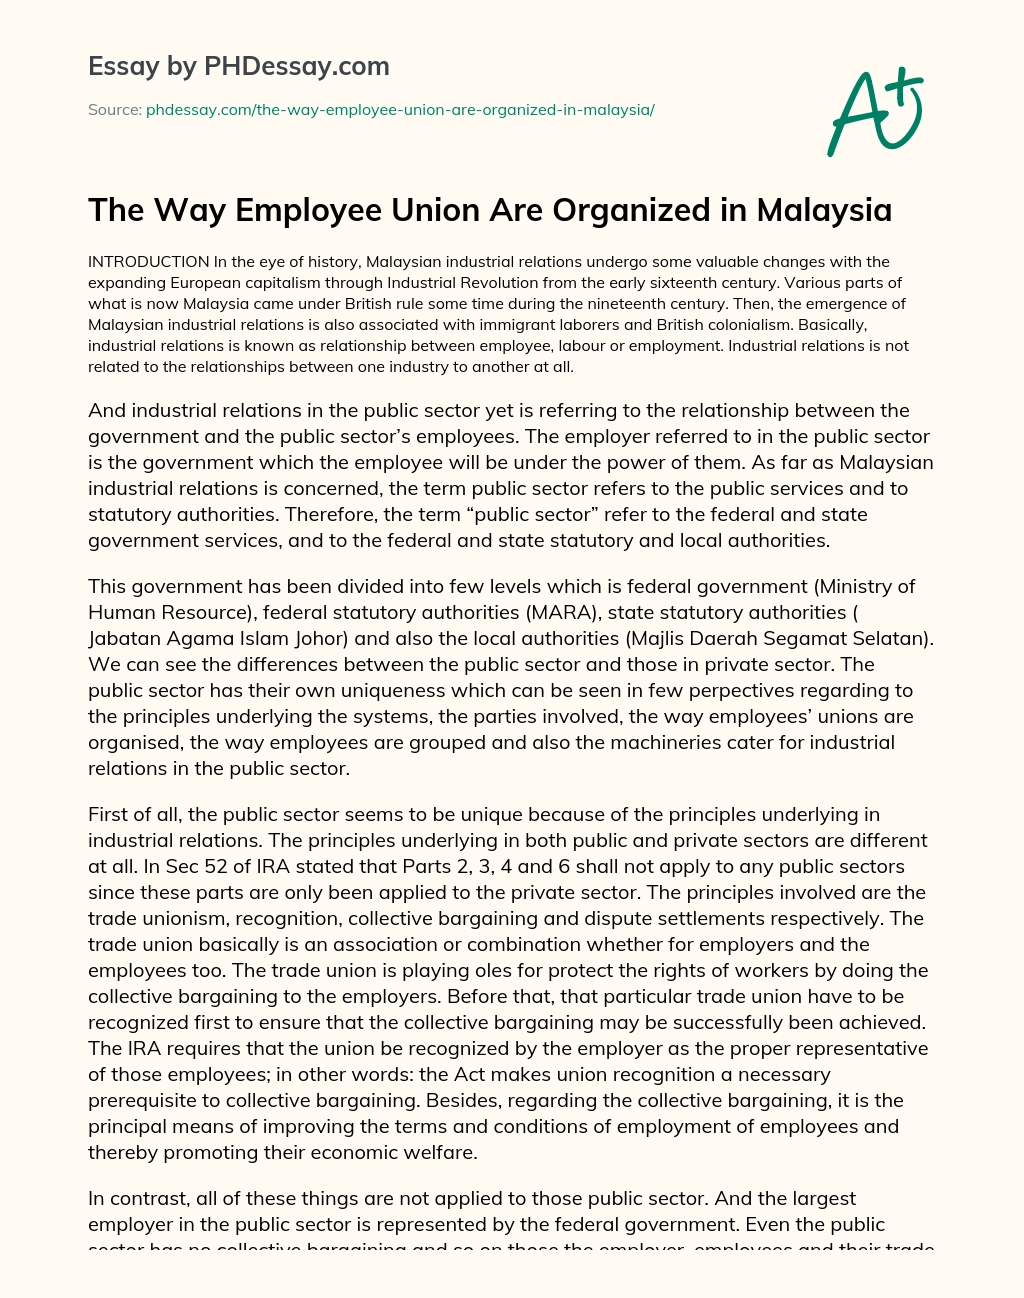 The Way Employee Union Are Organized in Malaysia essay